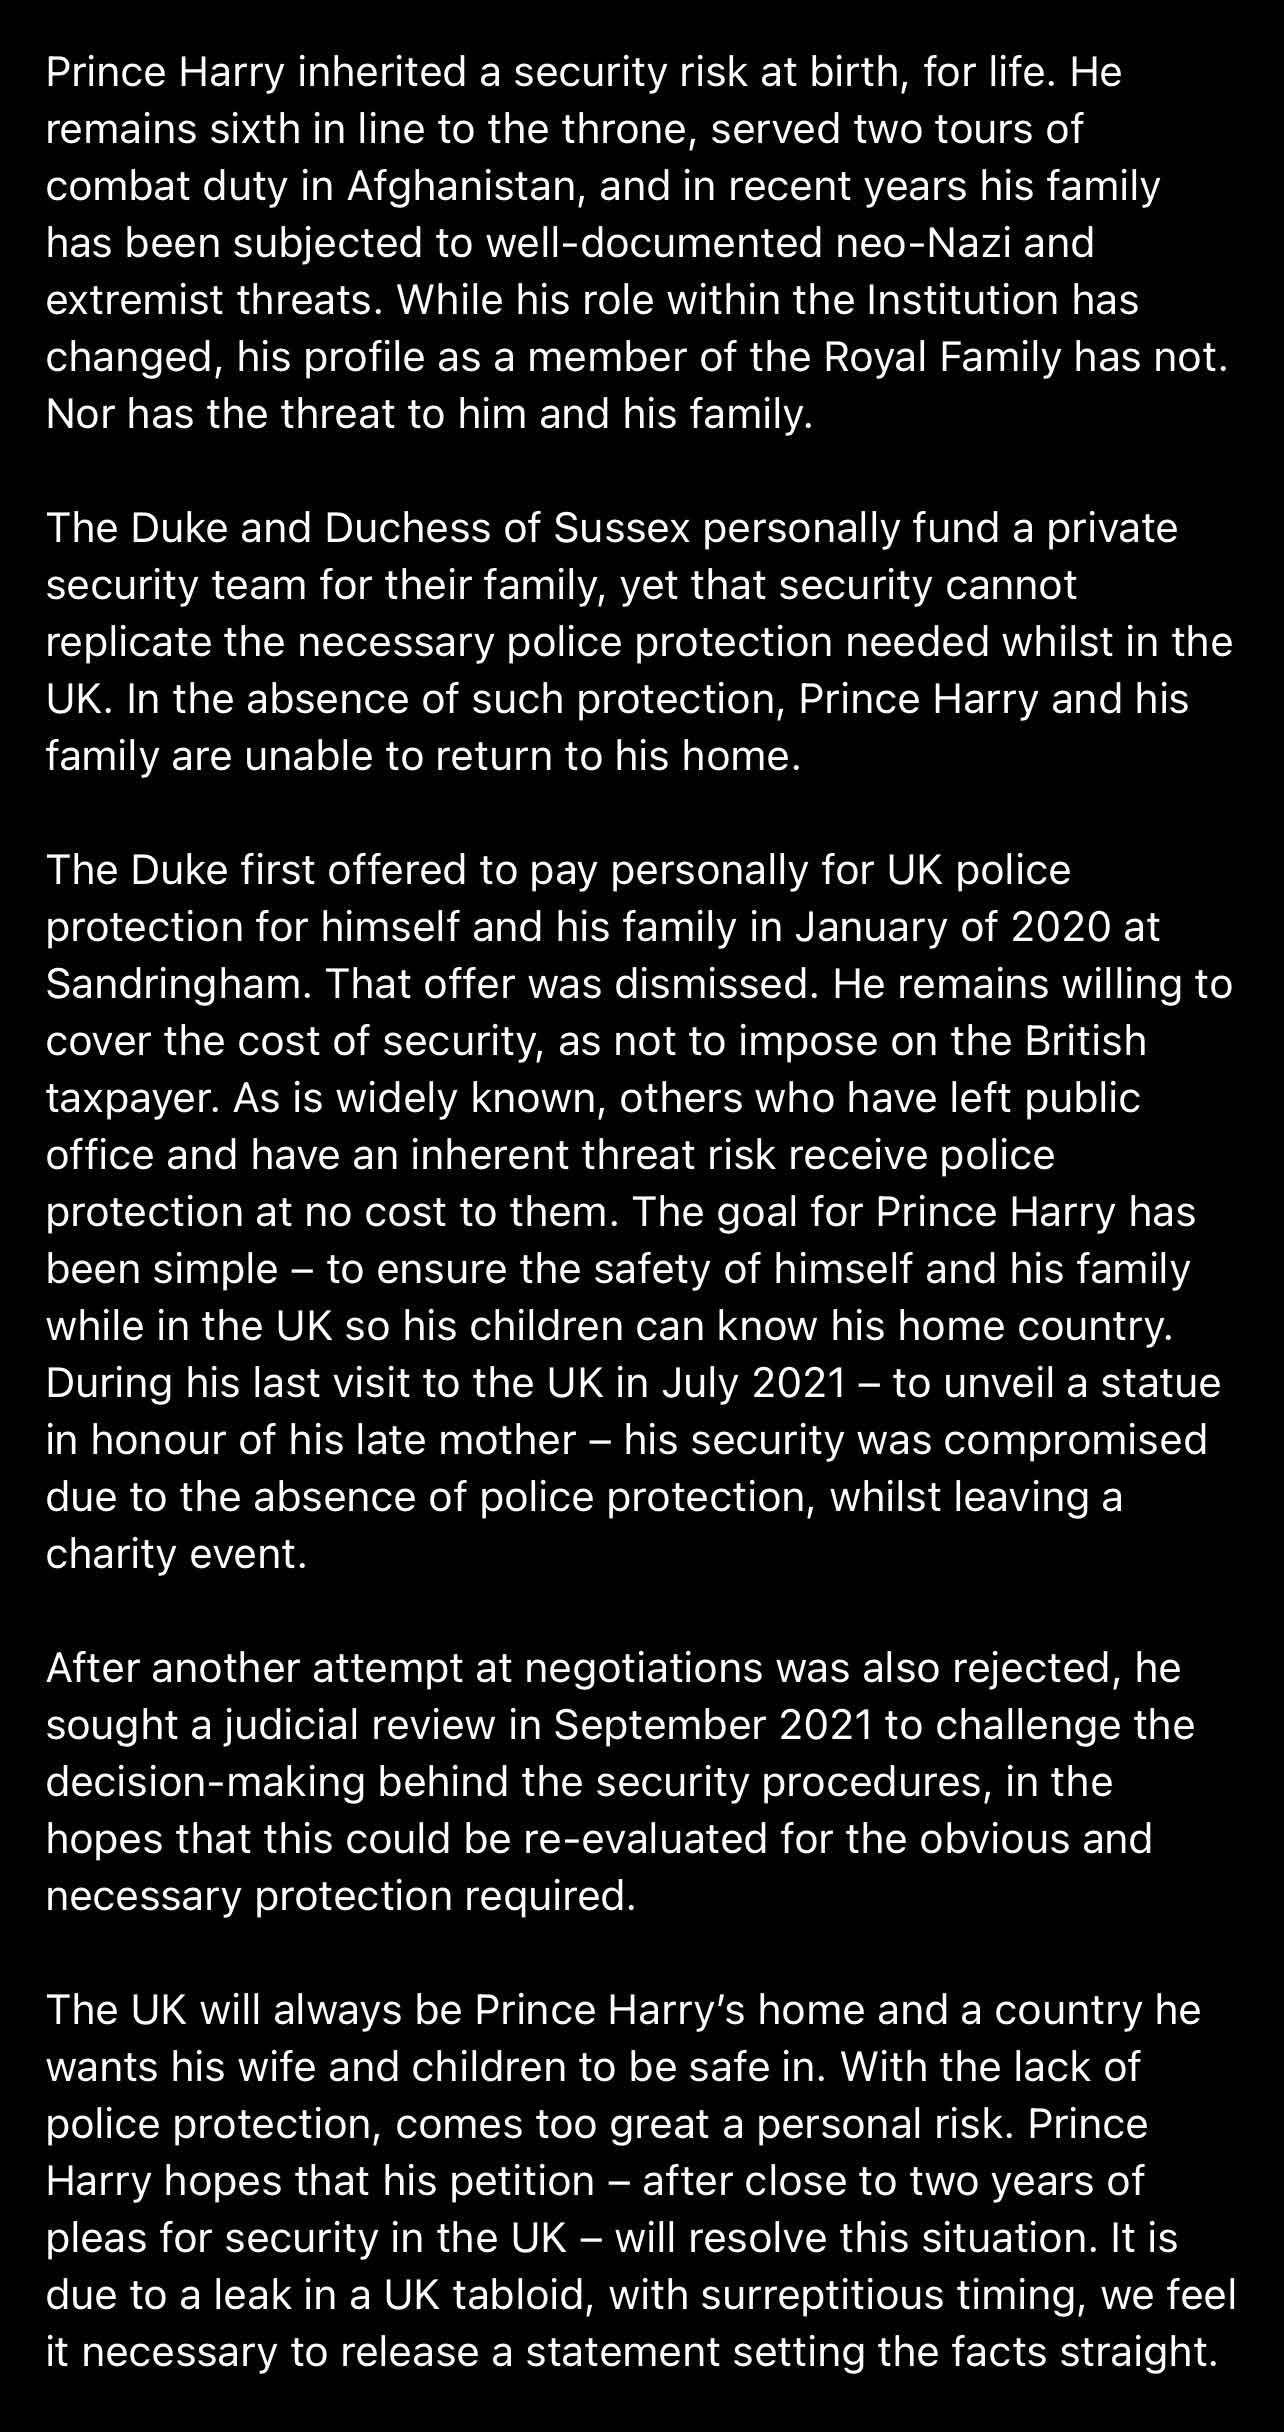 Full statement from Prince Harrys legal representative on Dukes security in UK